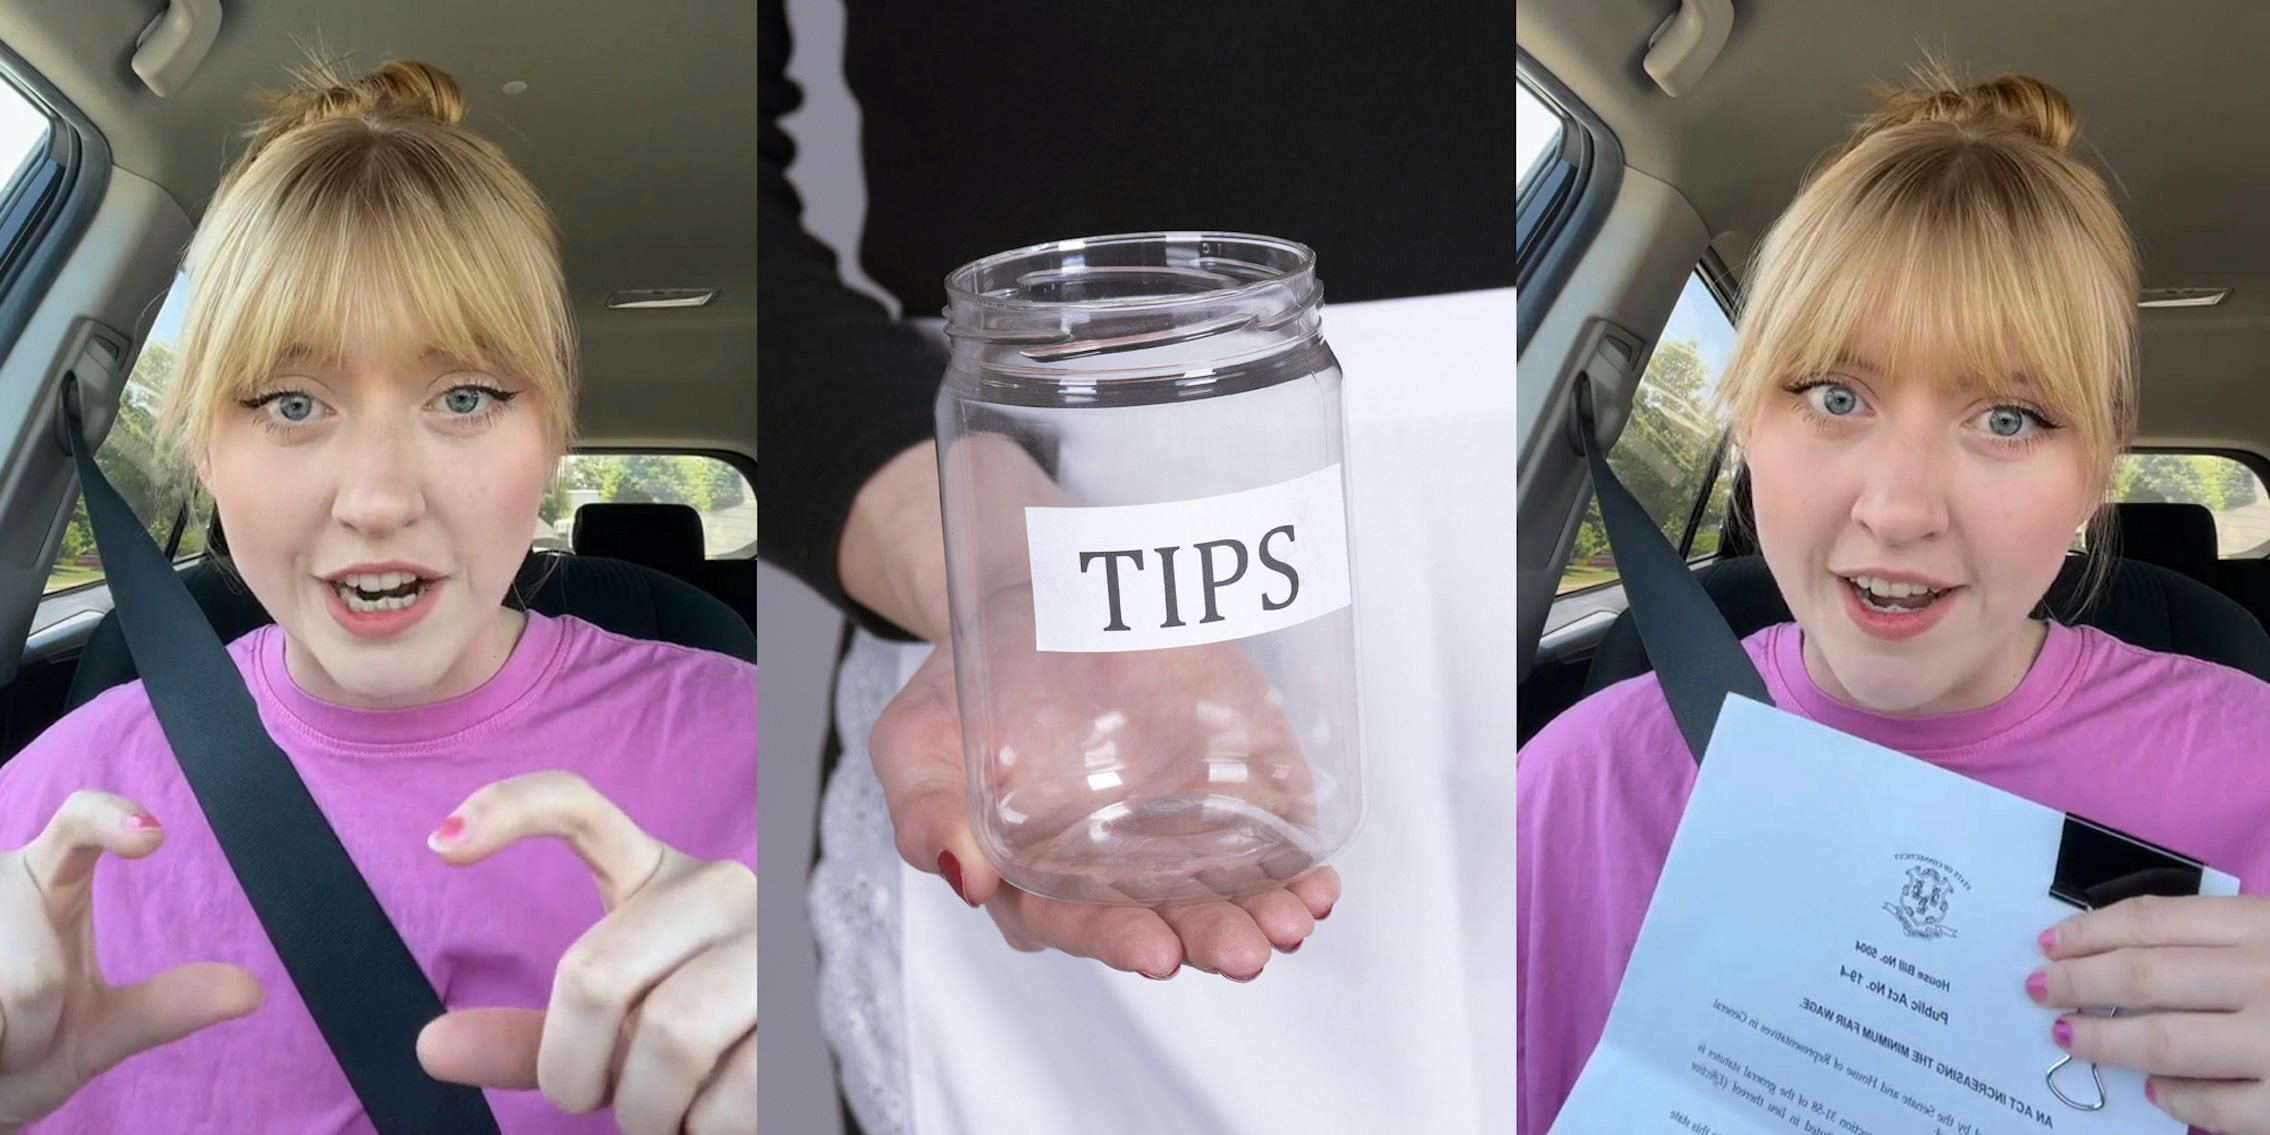 waitress speaking in car (l) Waitress holding up empty tip jar (c) waitress speaking in car holding papers (r)